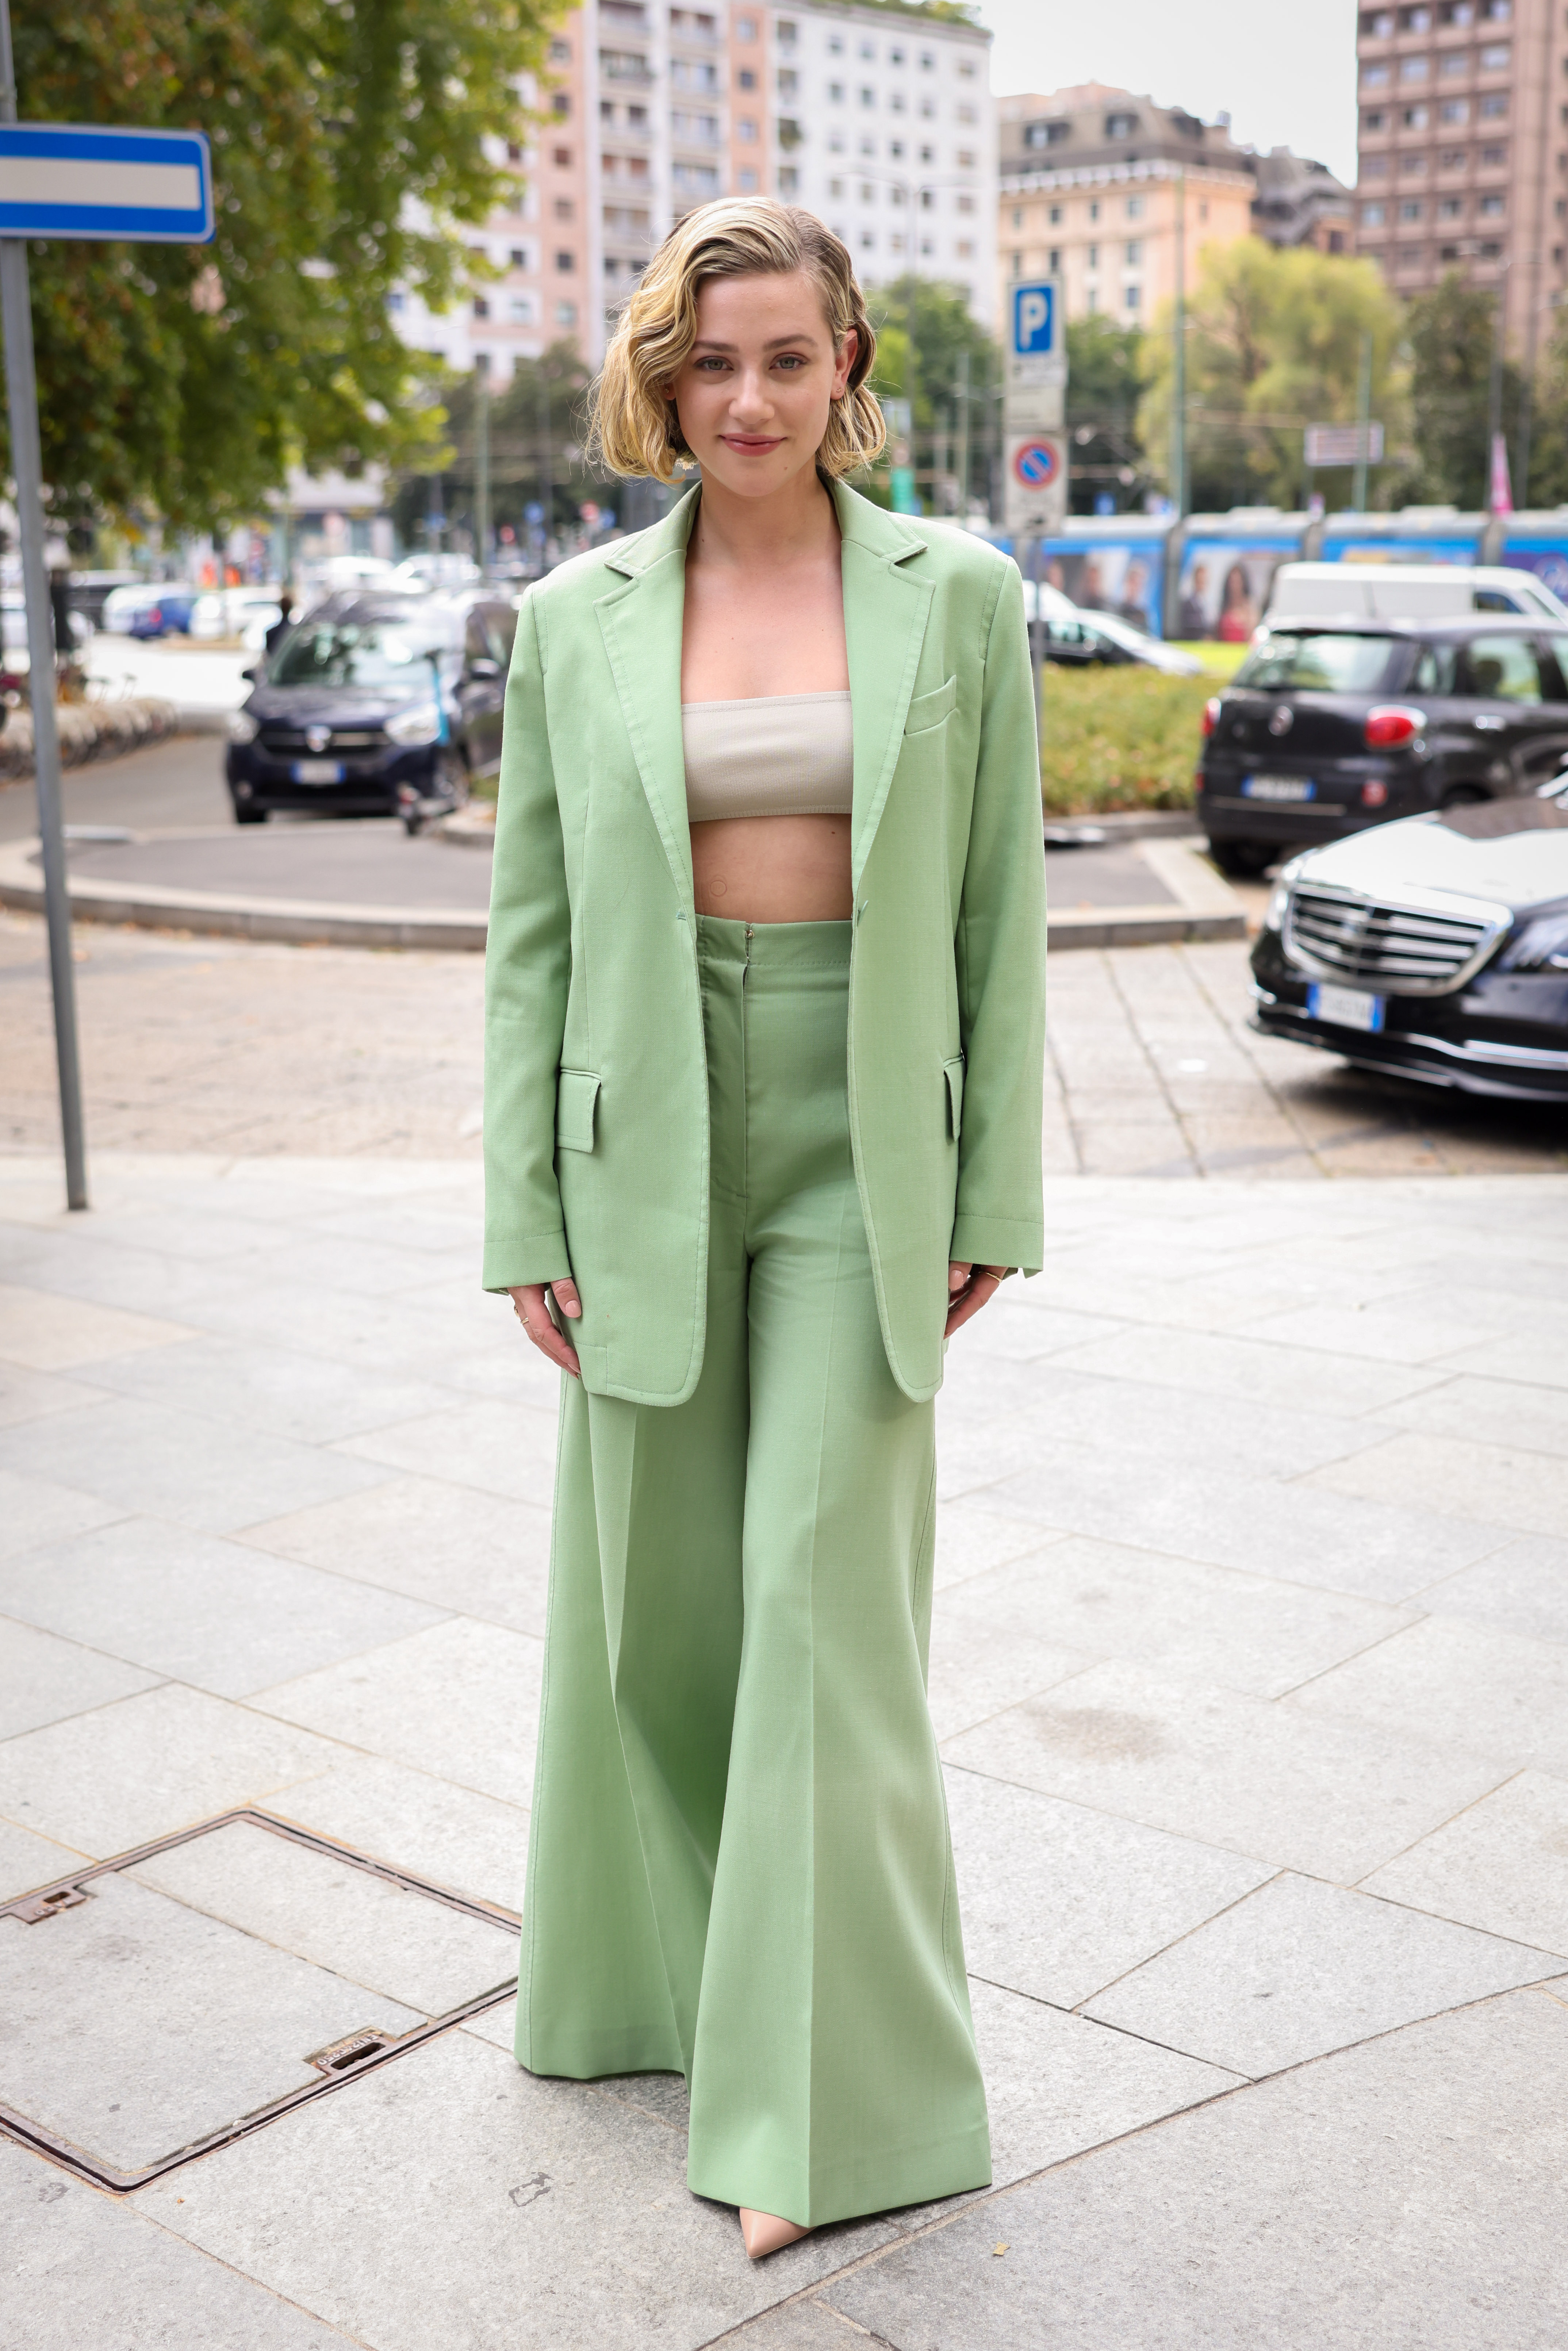 Lili Reinhart heading to Max Mara's Spring-Summer 2023 show at Milan Fashion Week wearing a pistachio green tailored outfit and sash top